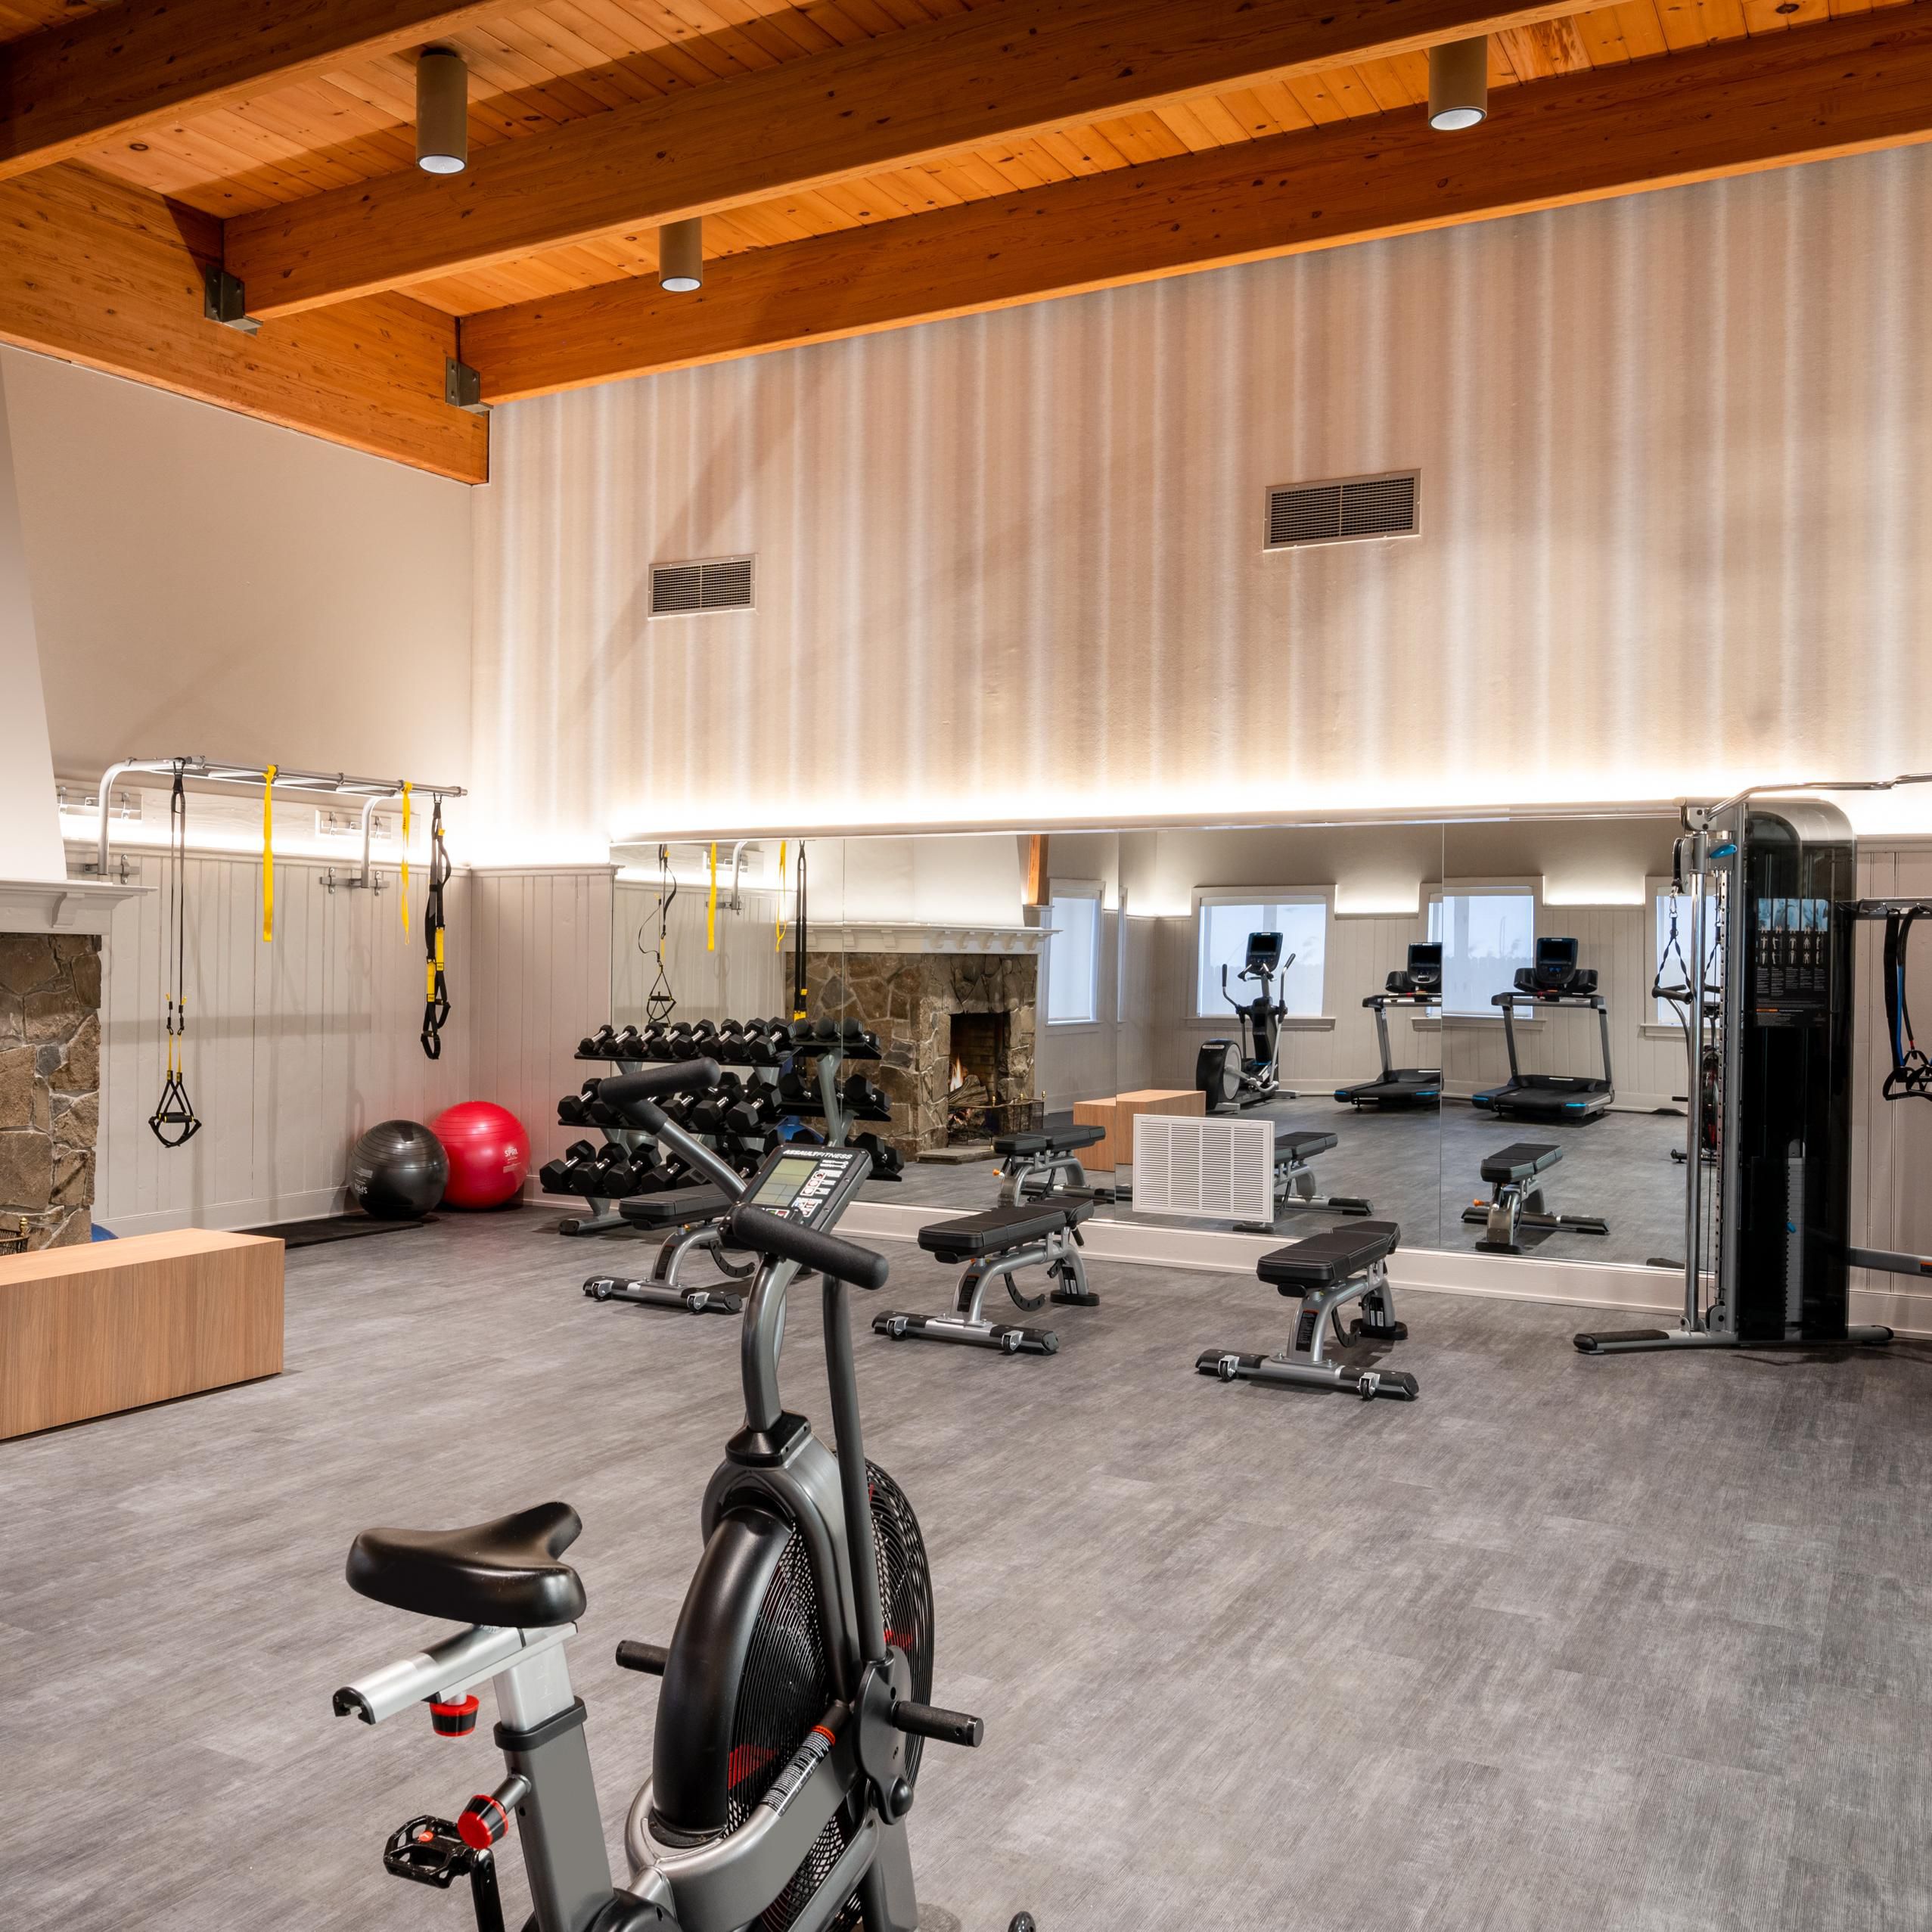 24-hour fitness center with all new equipment